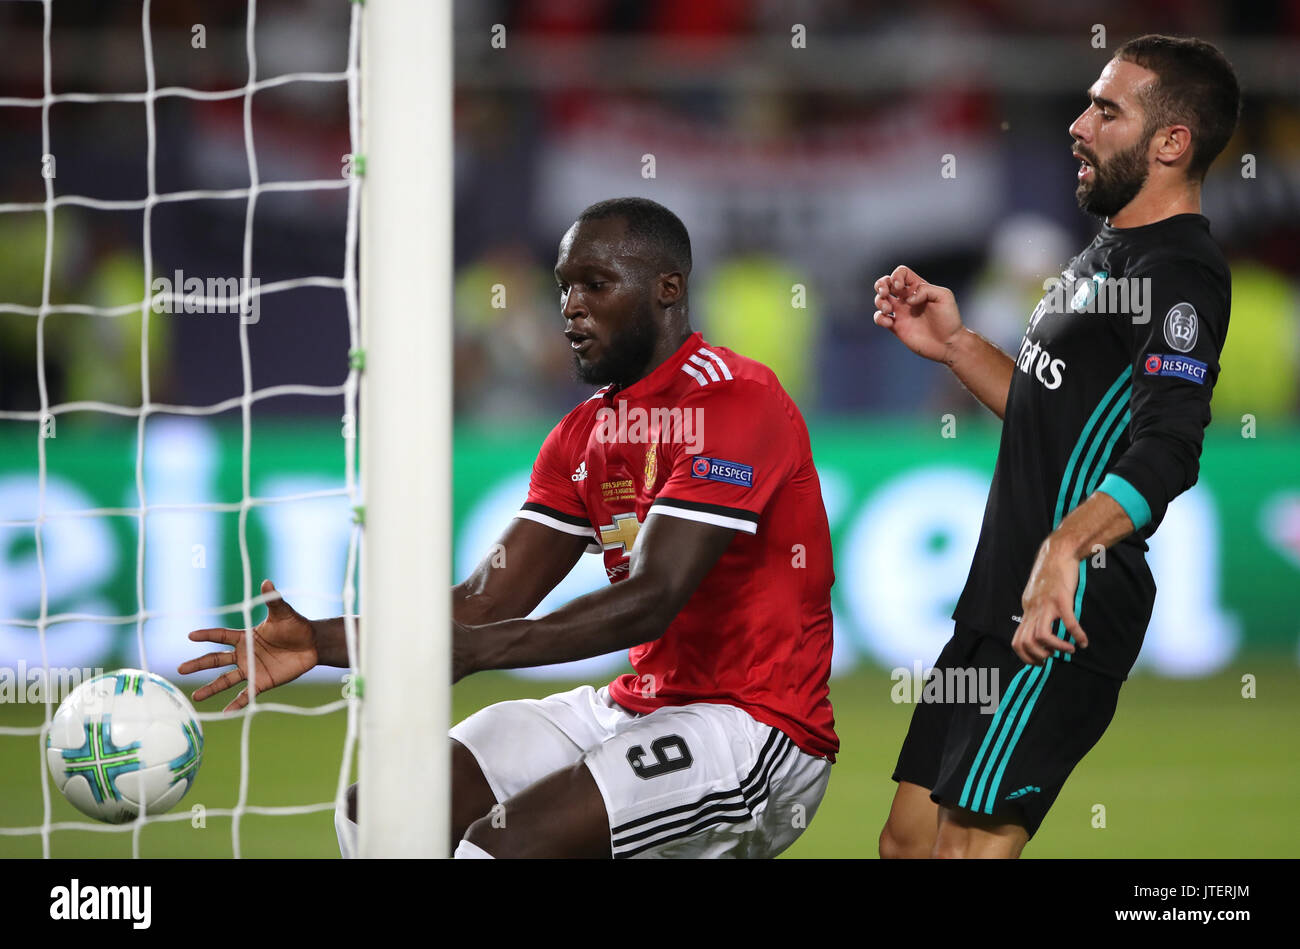 Manchester United's Romelu Lukaku grabs the ball as he celebrates scoring his side's first goal of the game during the UEFA Super Cup match at the Philip II Arena, Skopje, Macedonia. Stock Photo